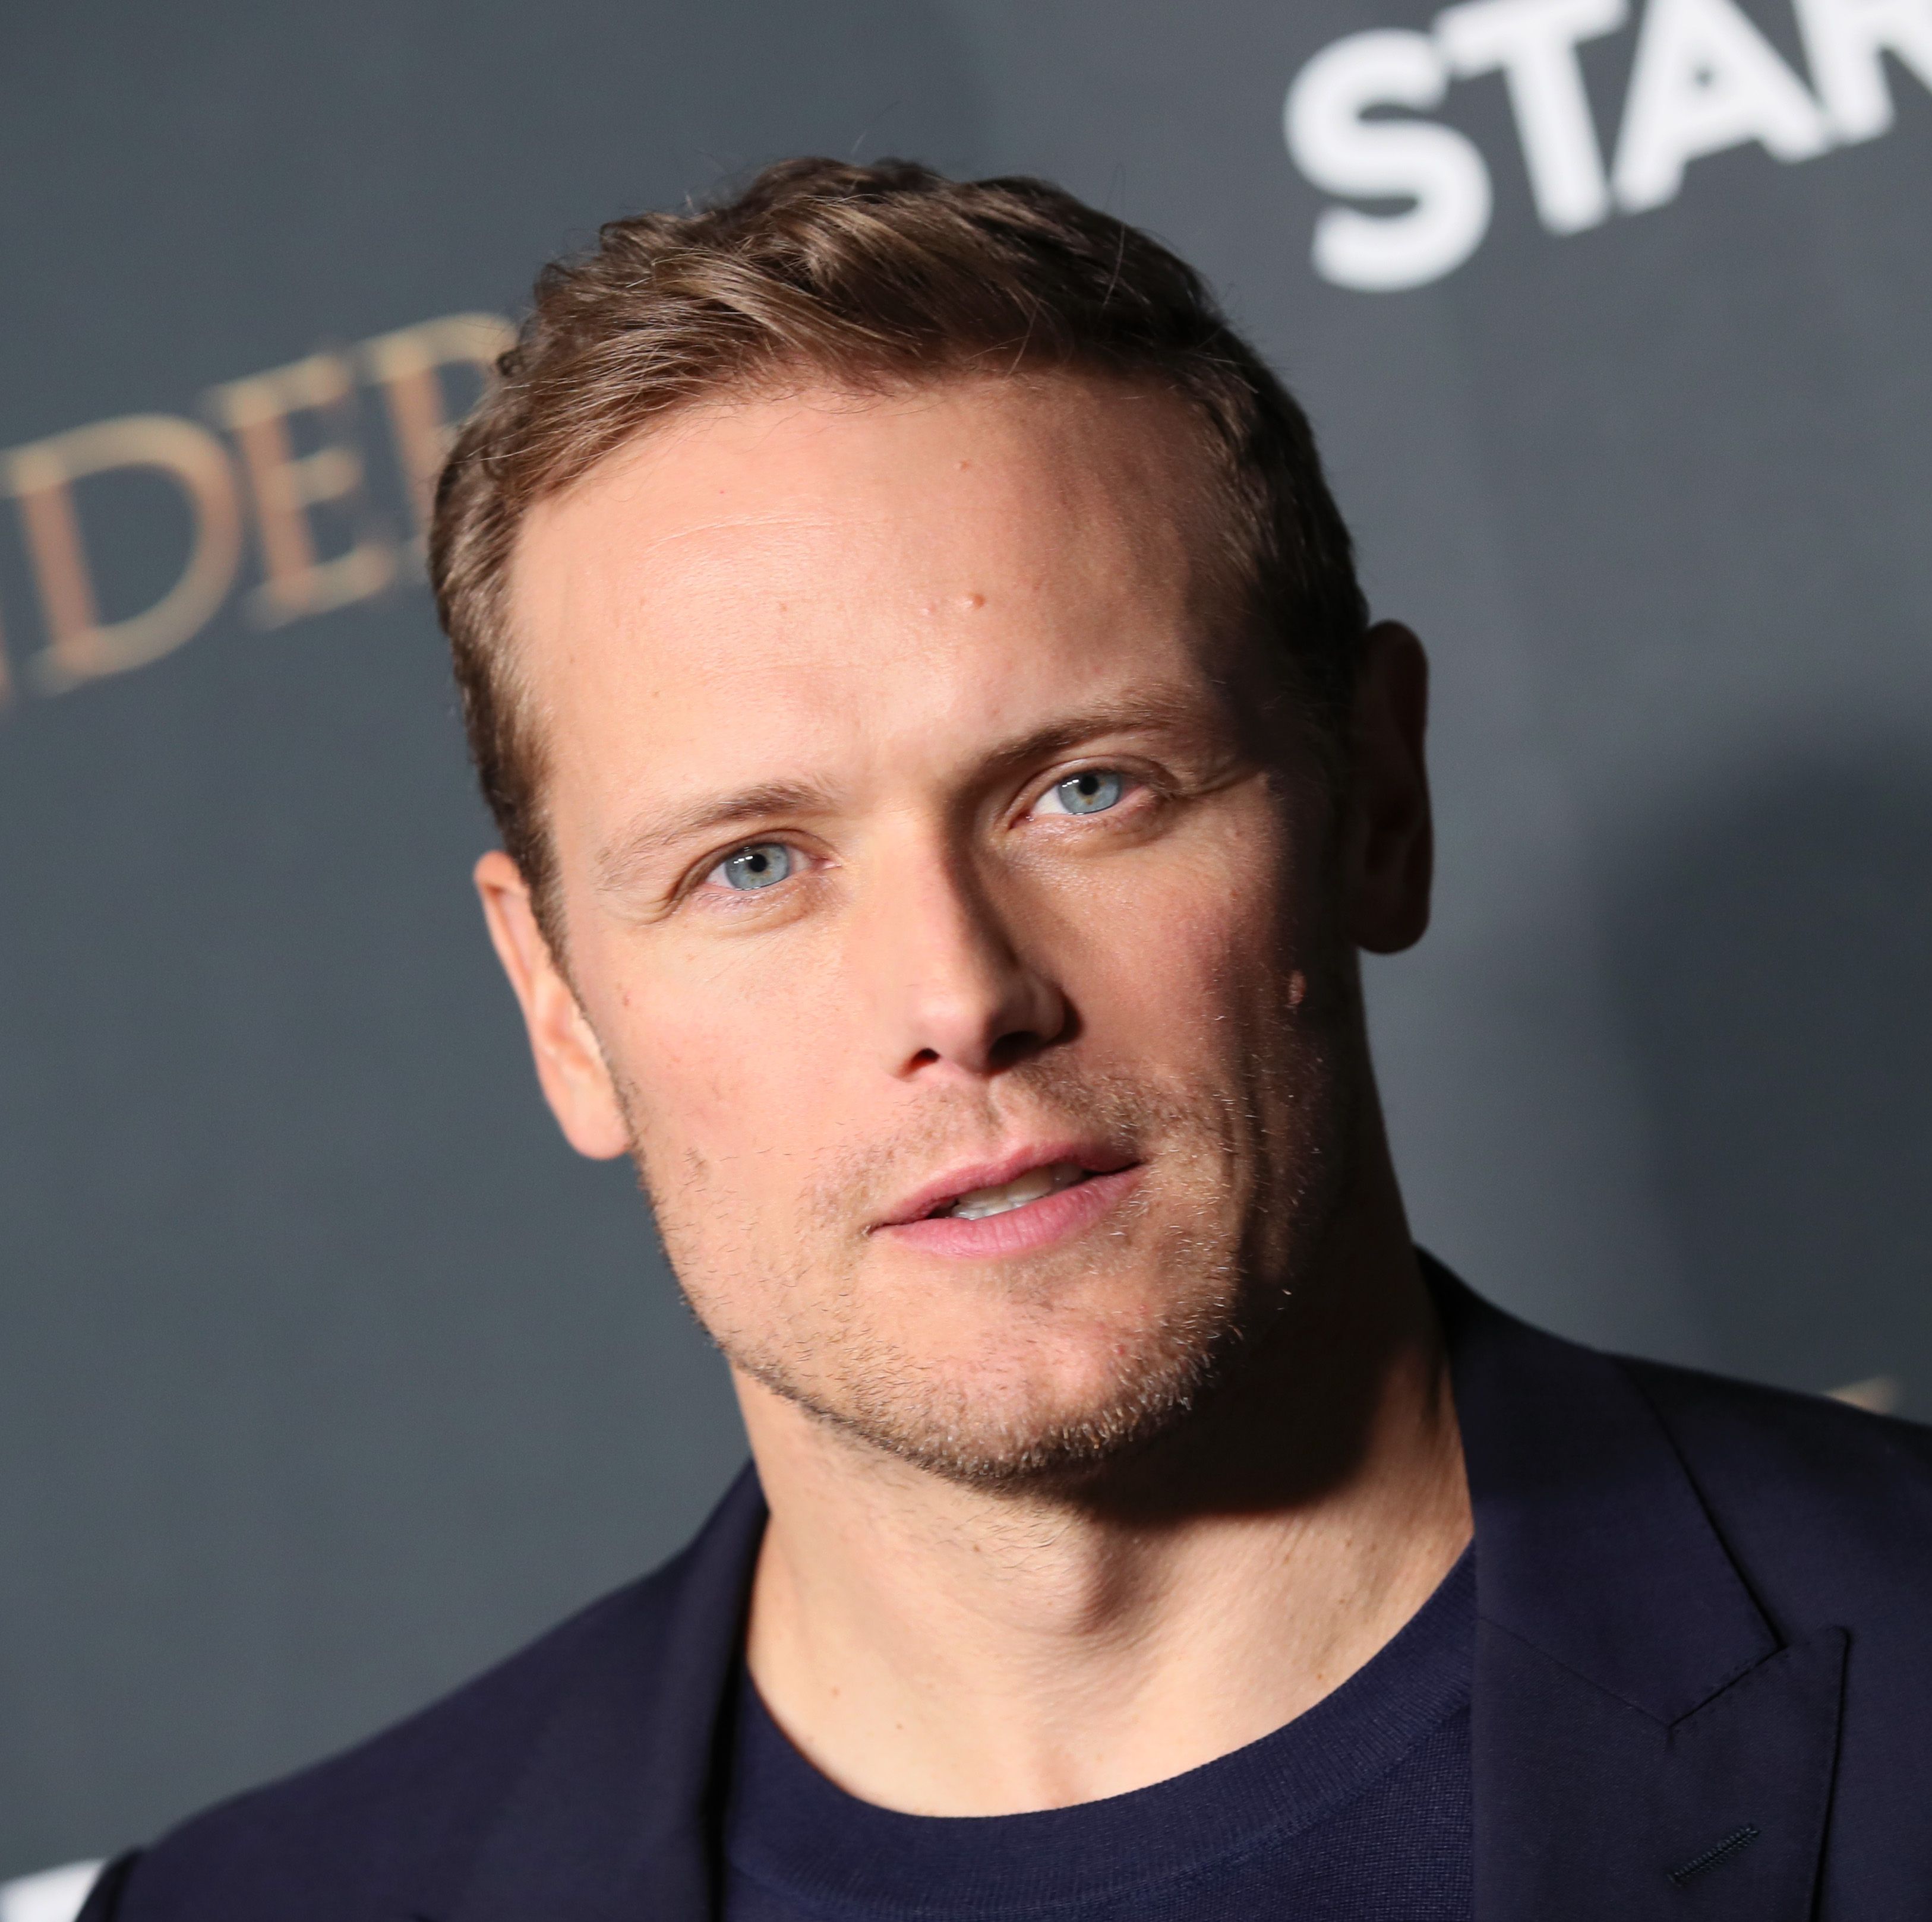 'Outlander' Star Sam Heughan Opened Up About His James Bond Hopes